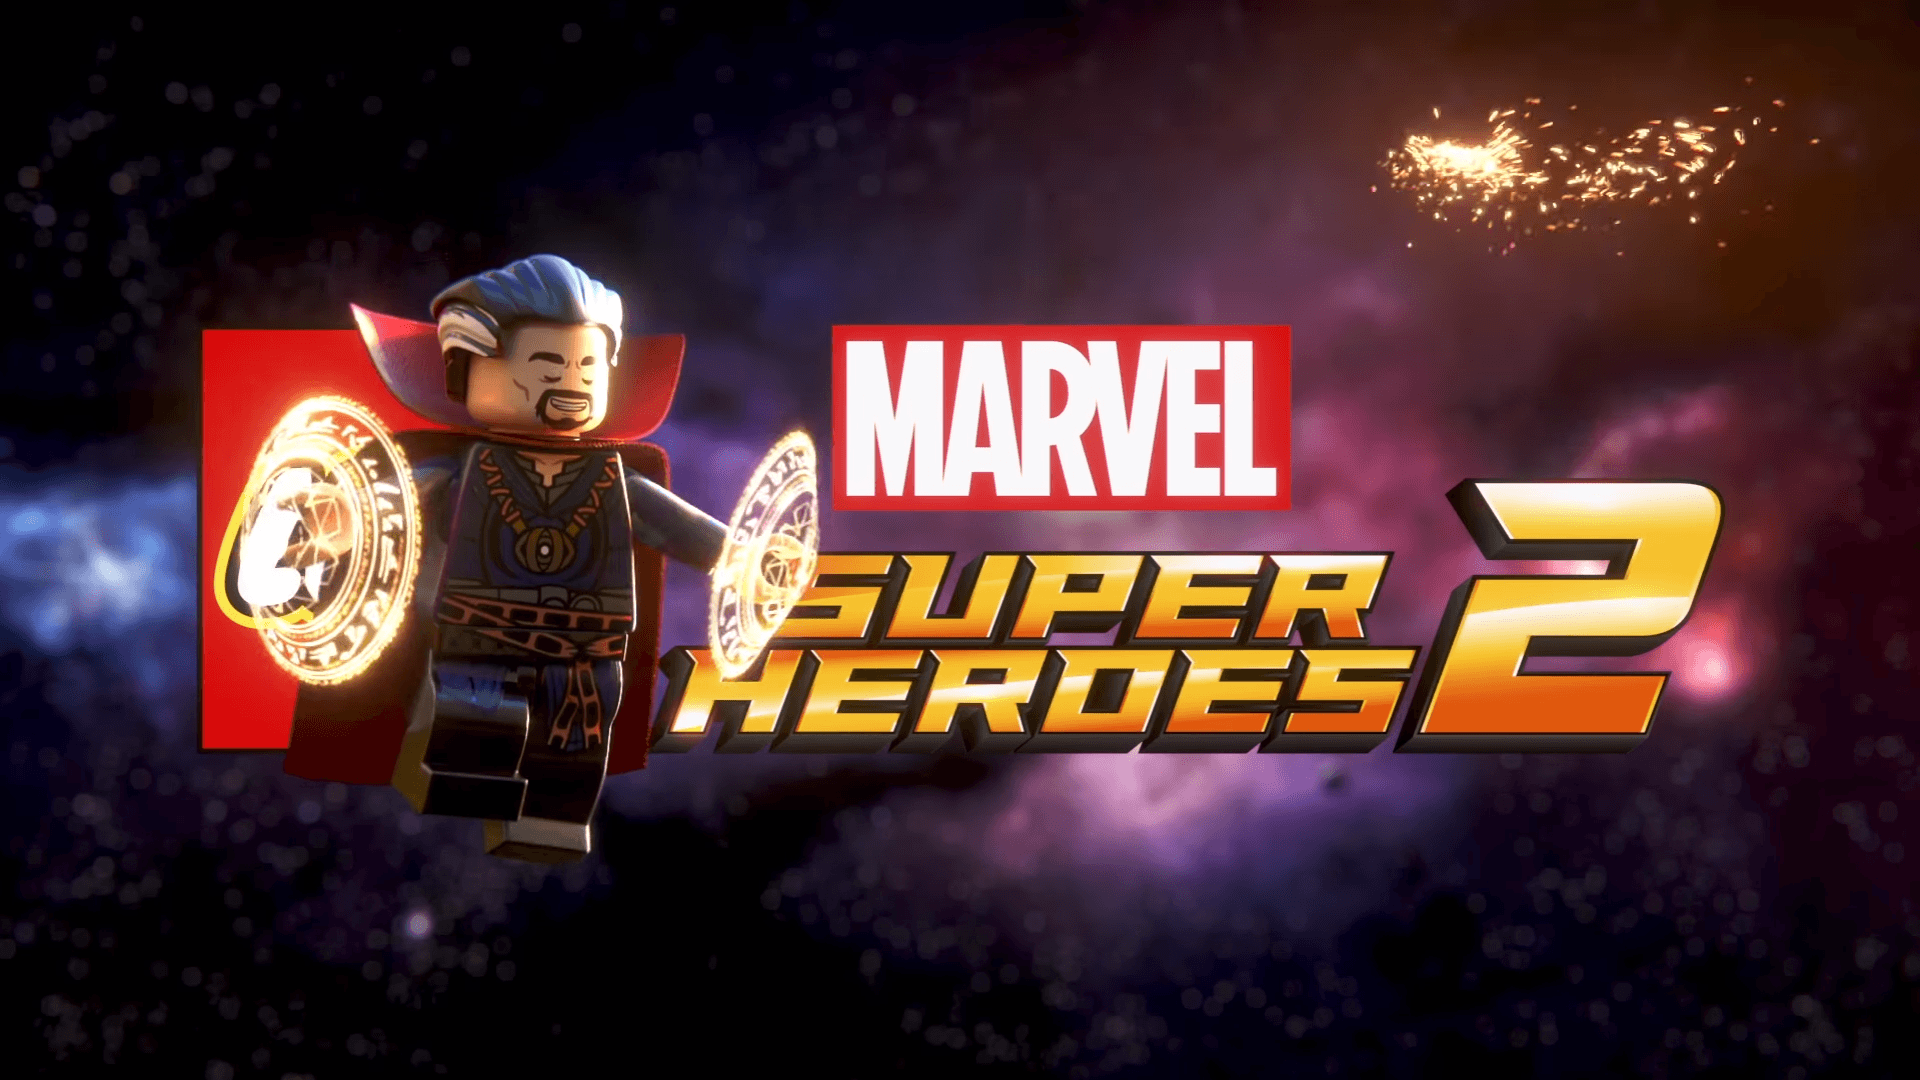 LEGO Marvel Super Heroes 2 Wallpaper Image Photo Picture Background